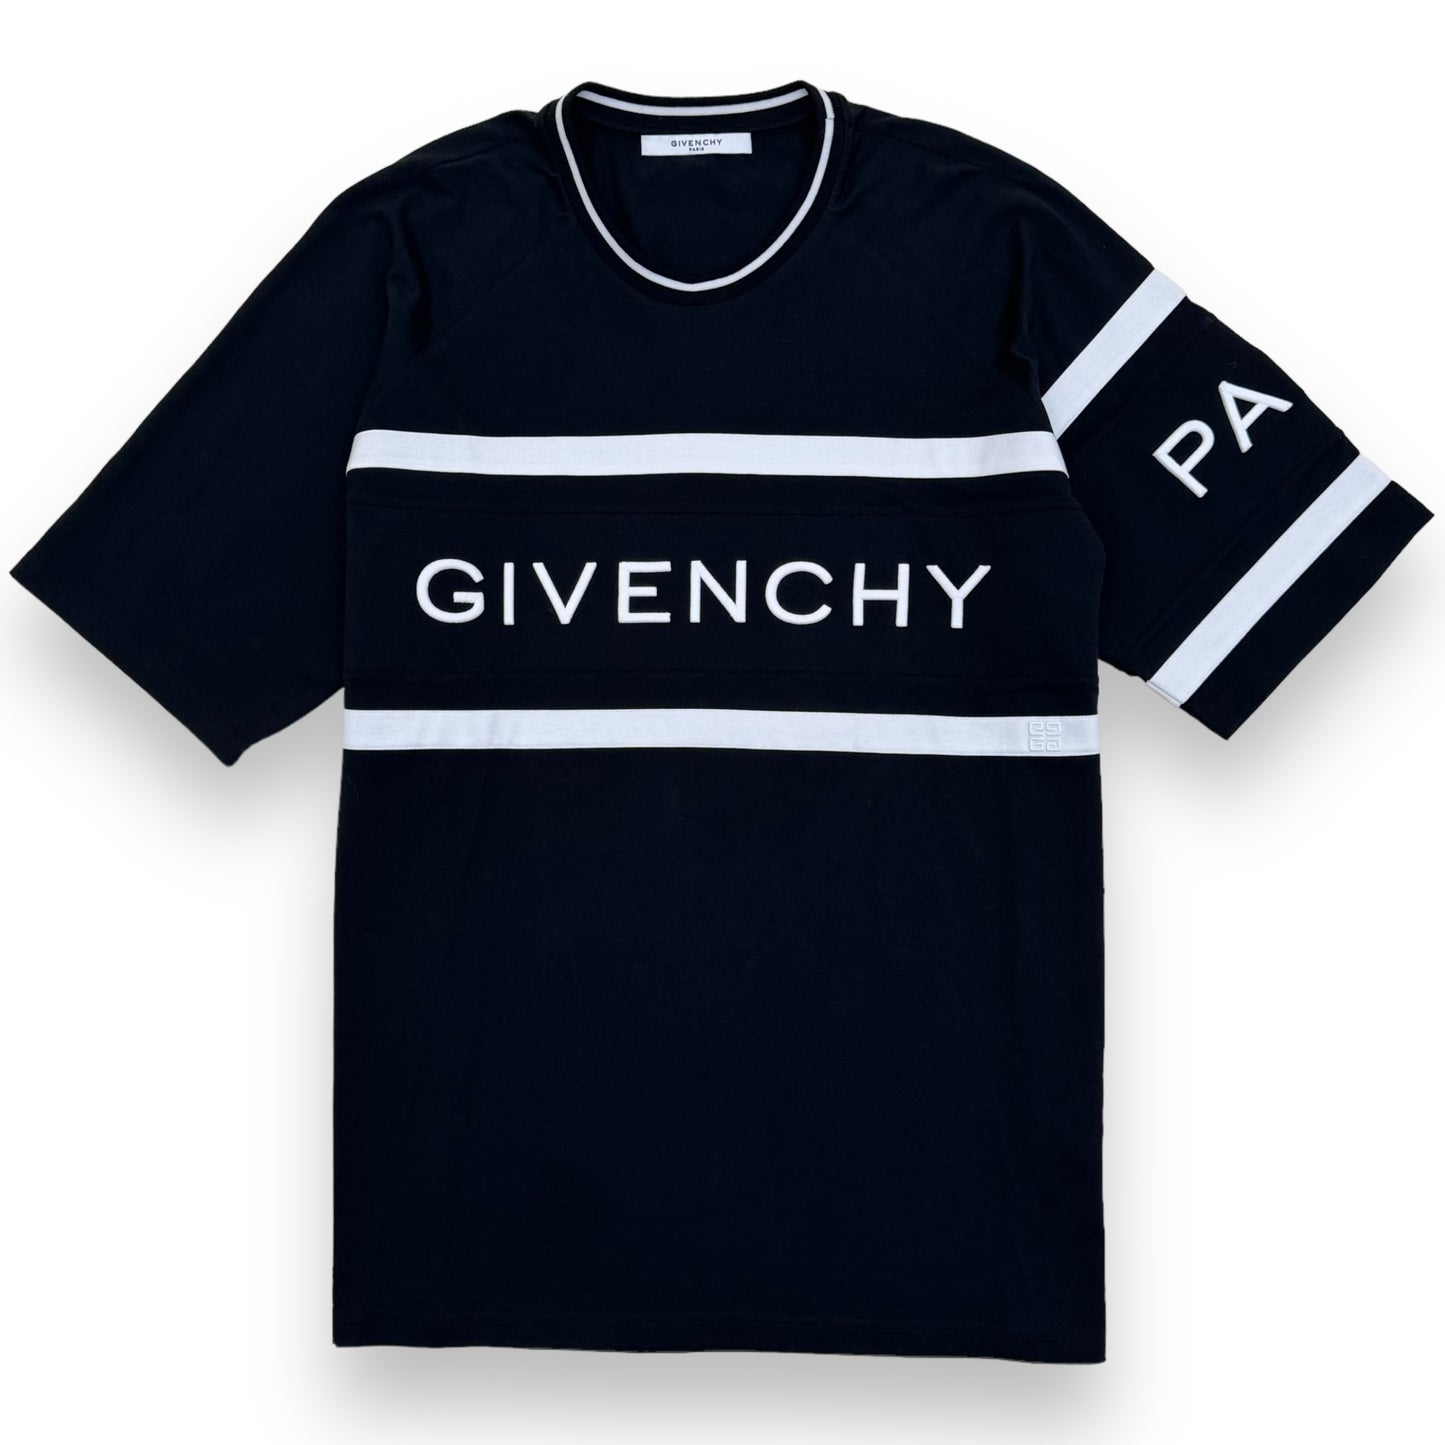 GIVENCHY EMBROIDERED LOGO T-SHIRT BLACK / WHITE L